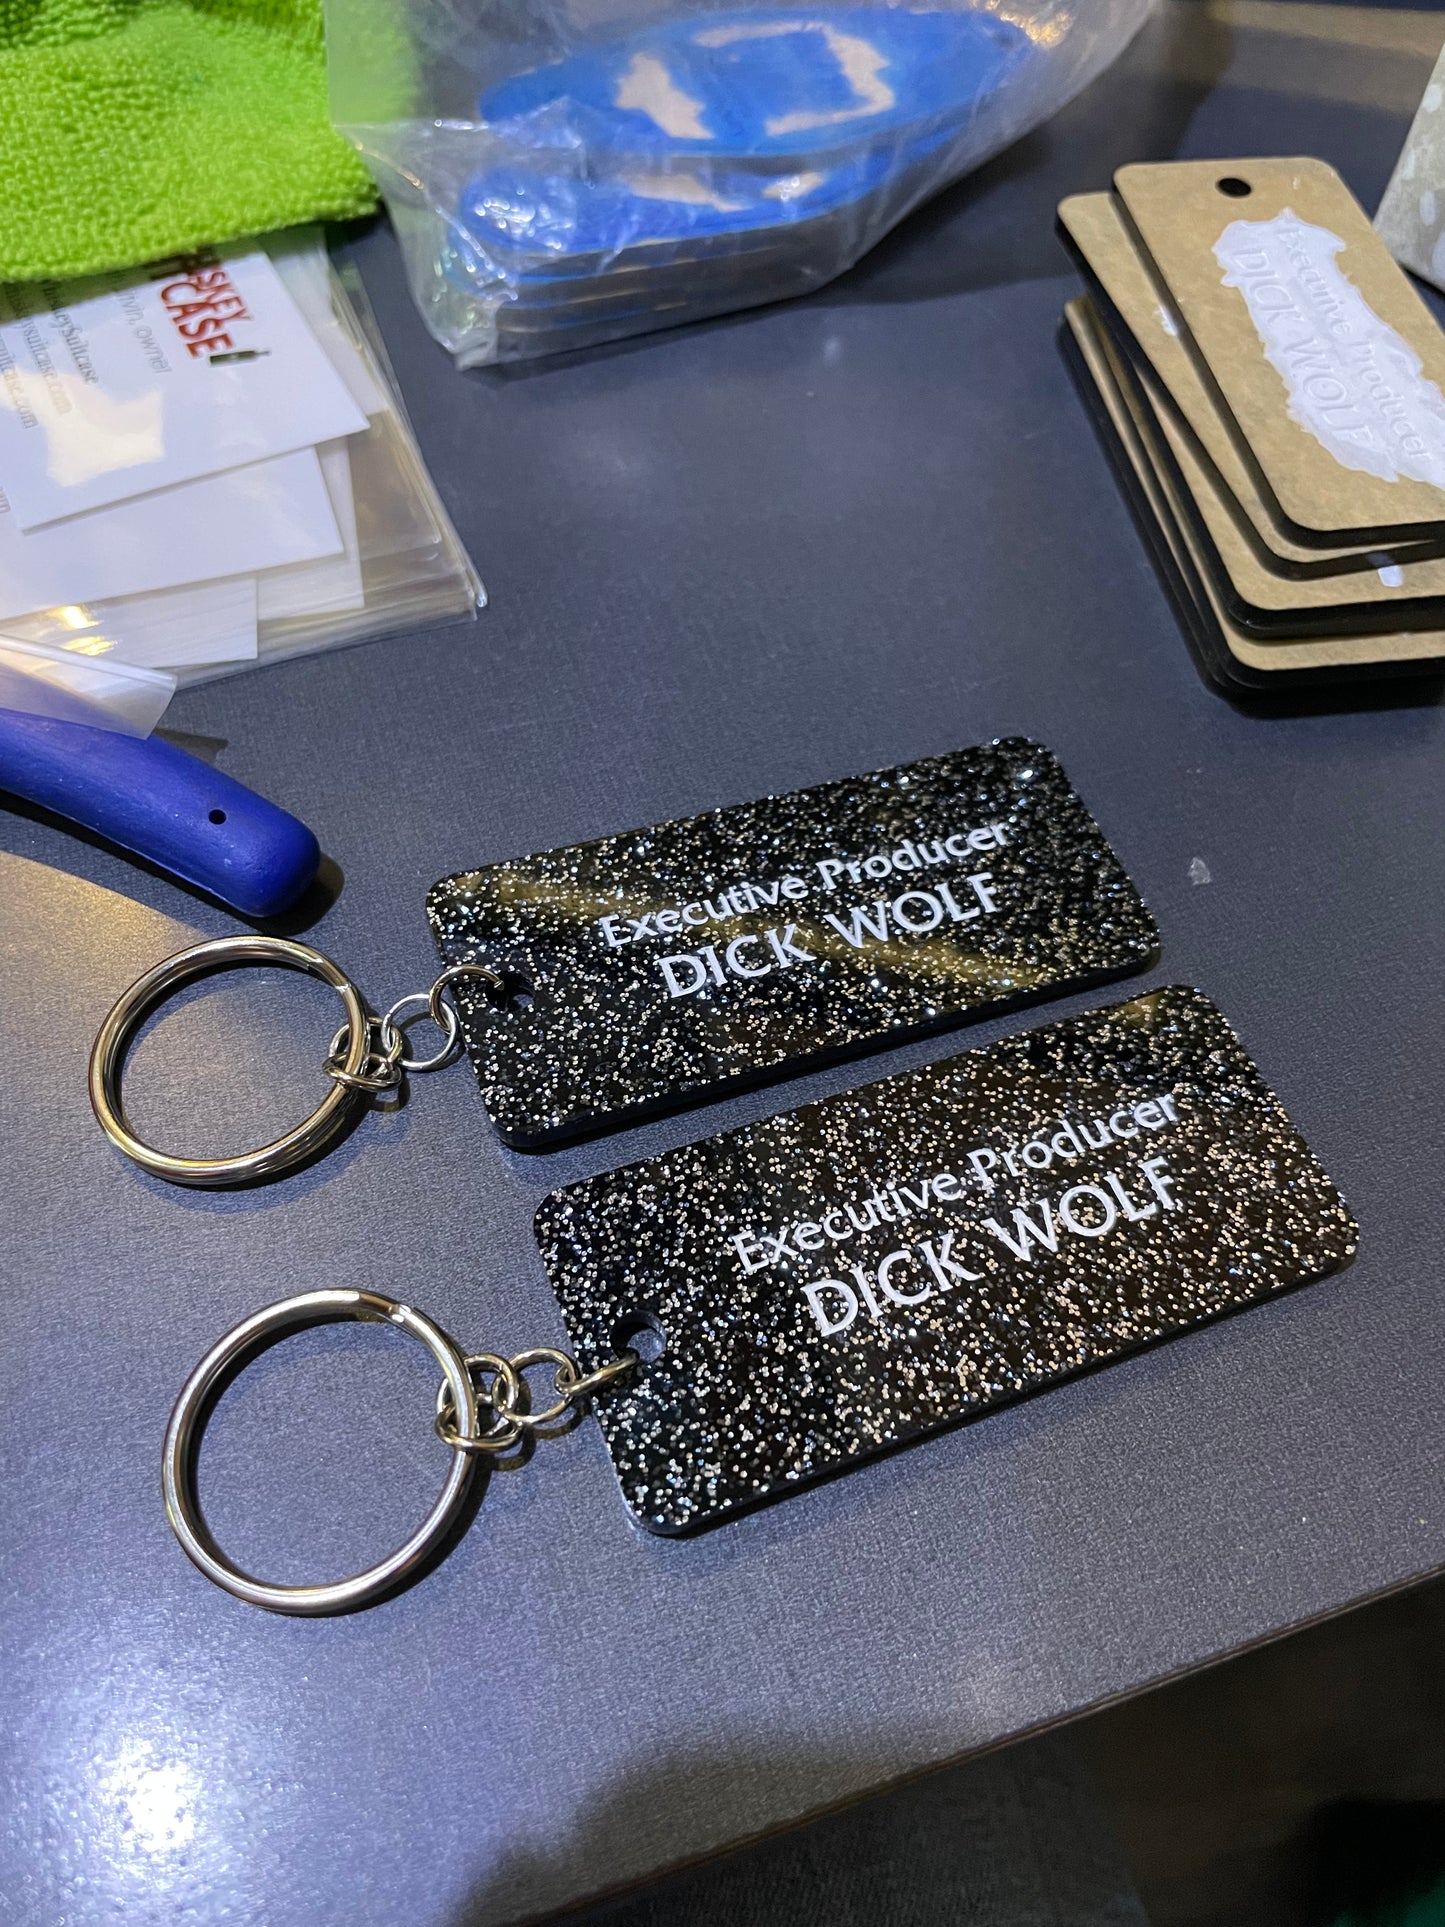 "Executive Producer Dick Wolf" title screen Keychain